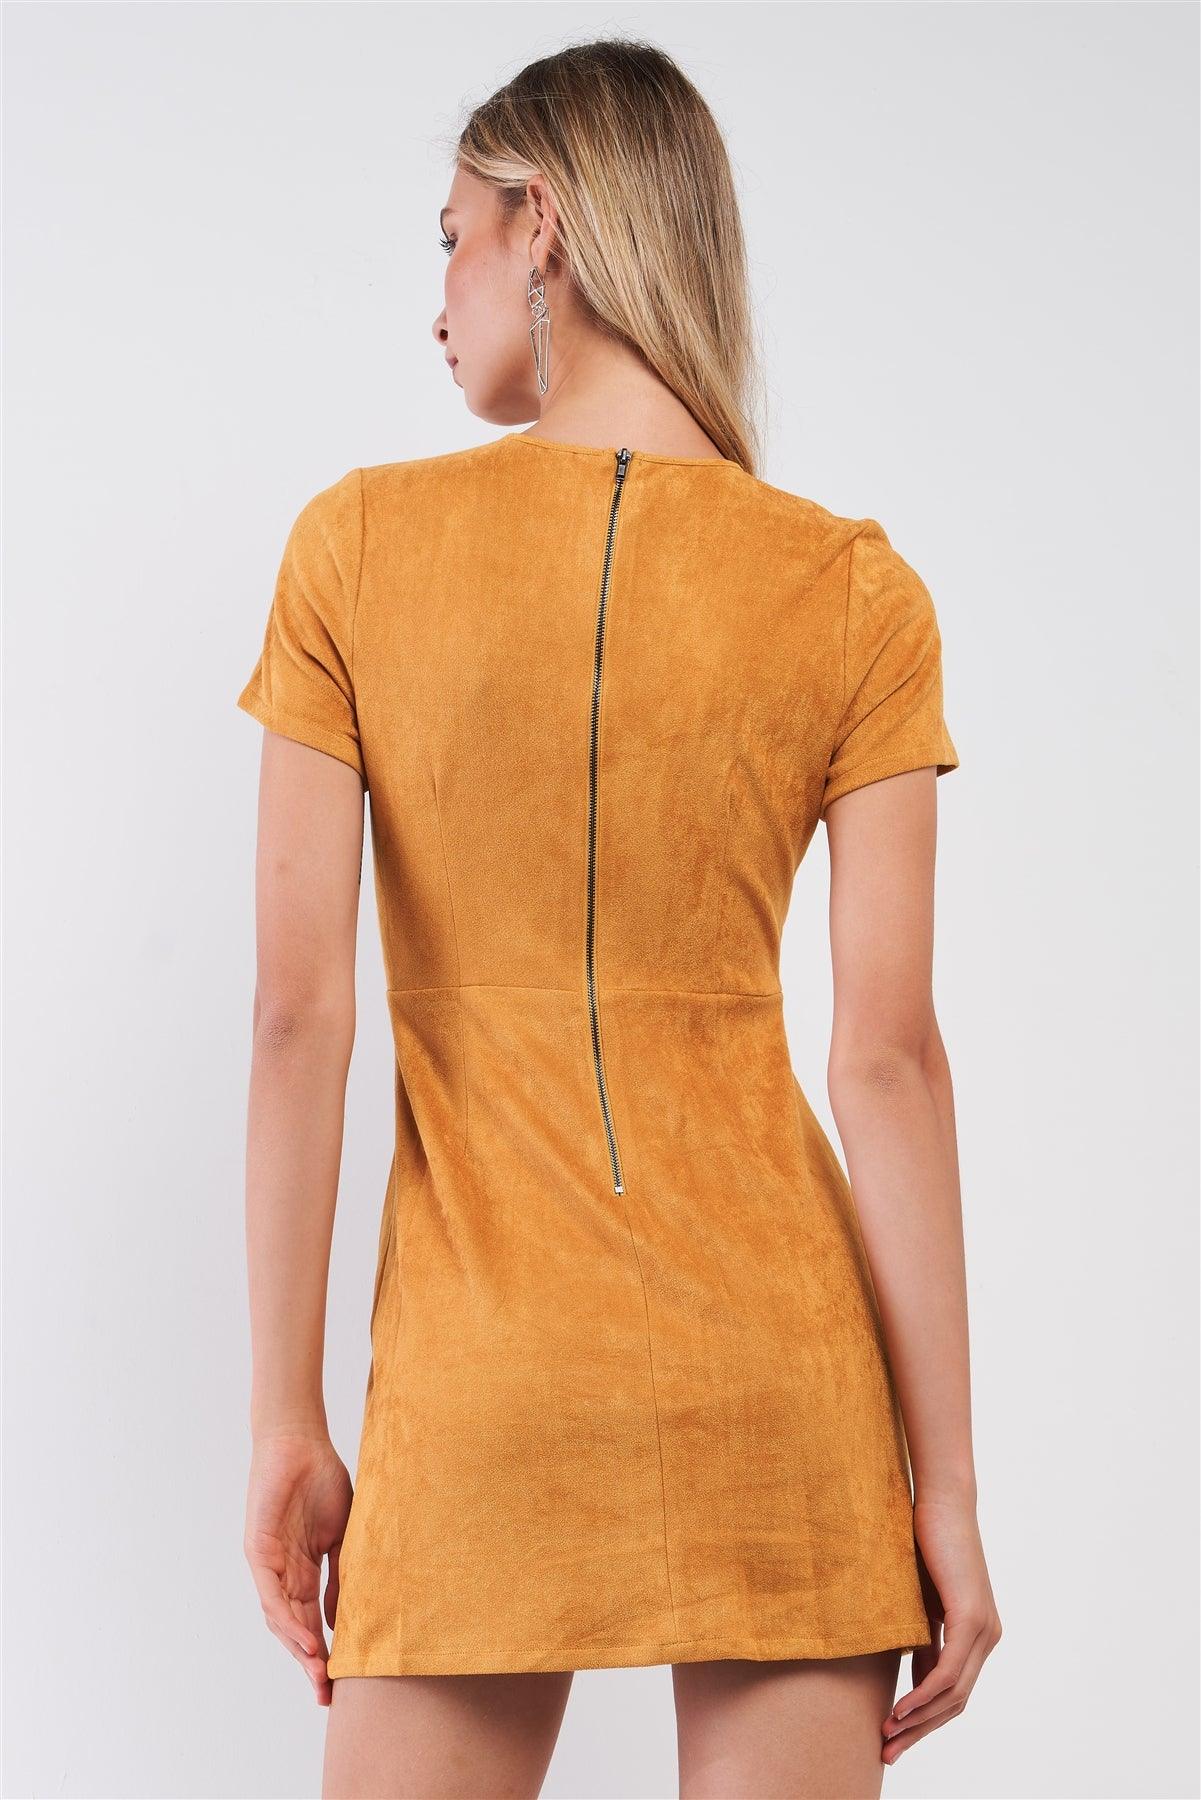 Camel-Mustard Lace-Up Vegan Suede Short Sleeve Fitted Mini Dress /1-1-2-2